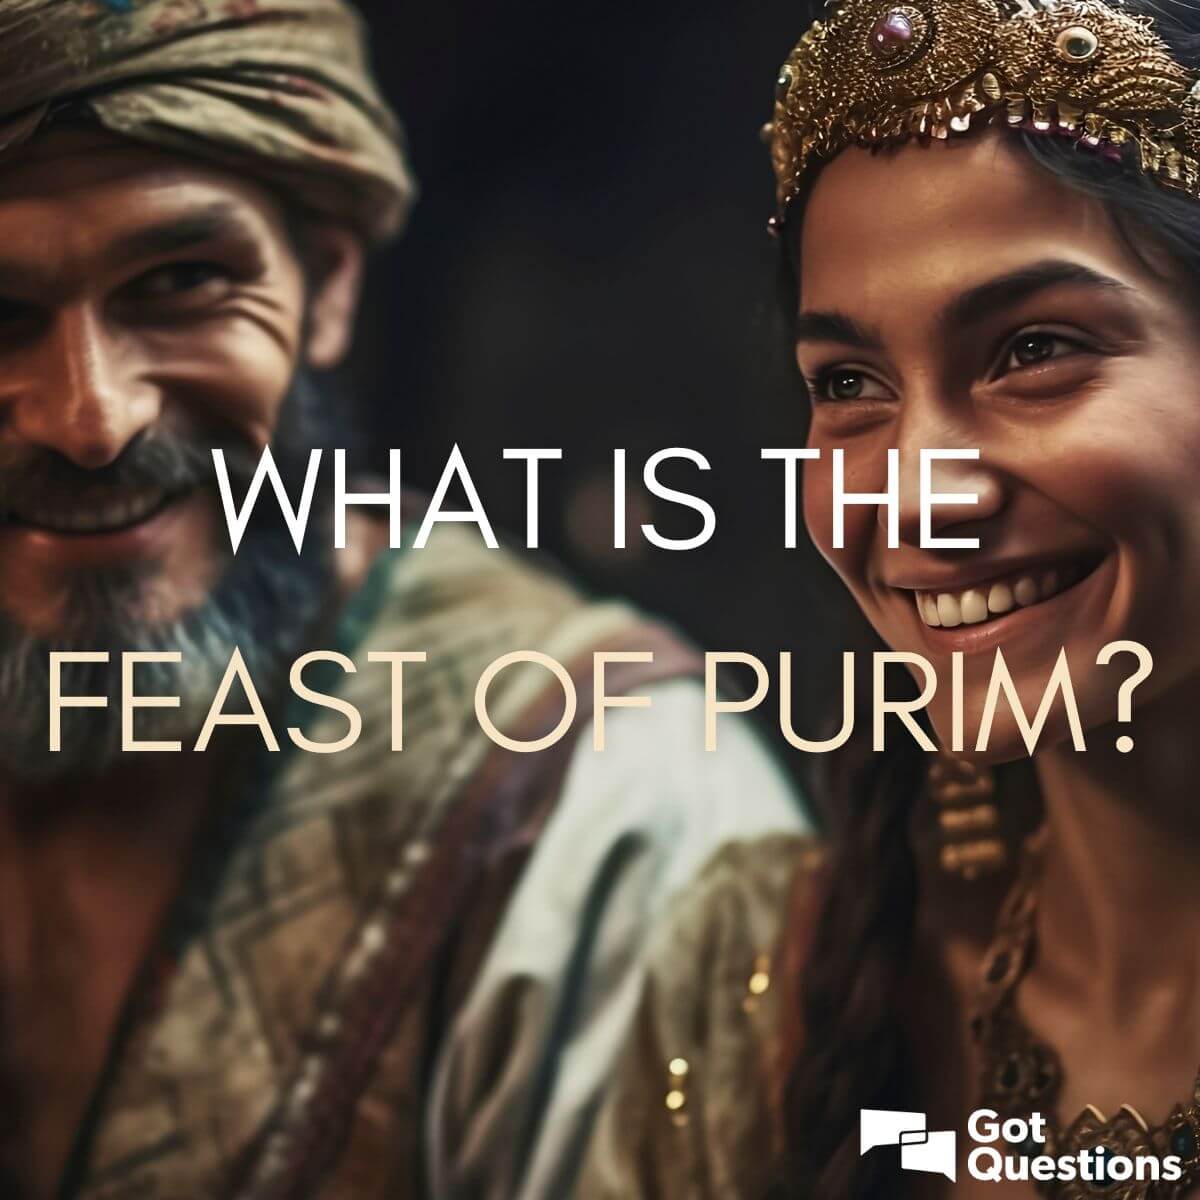 What is the Feast of Purim?